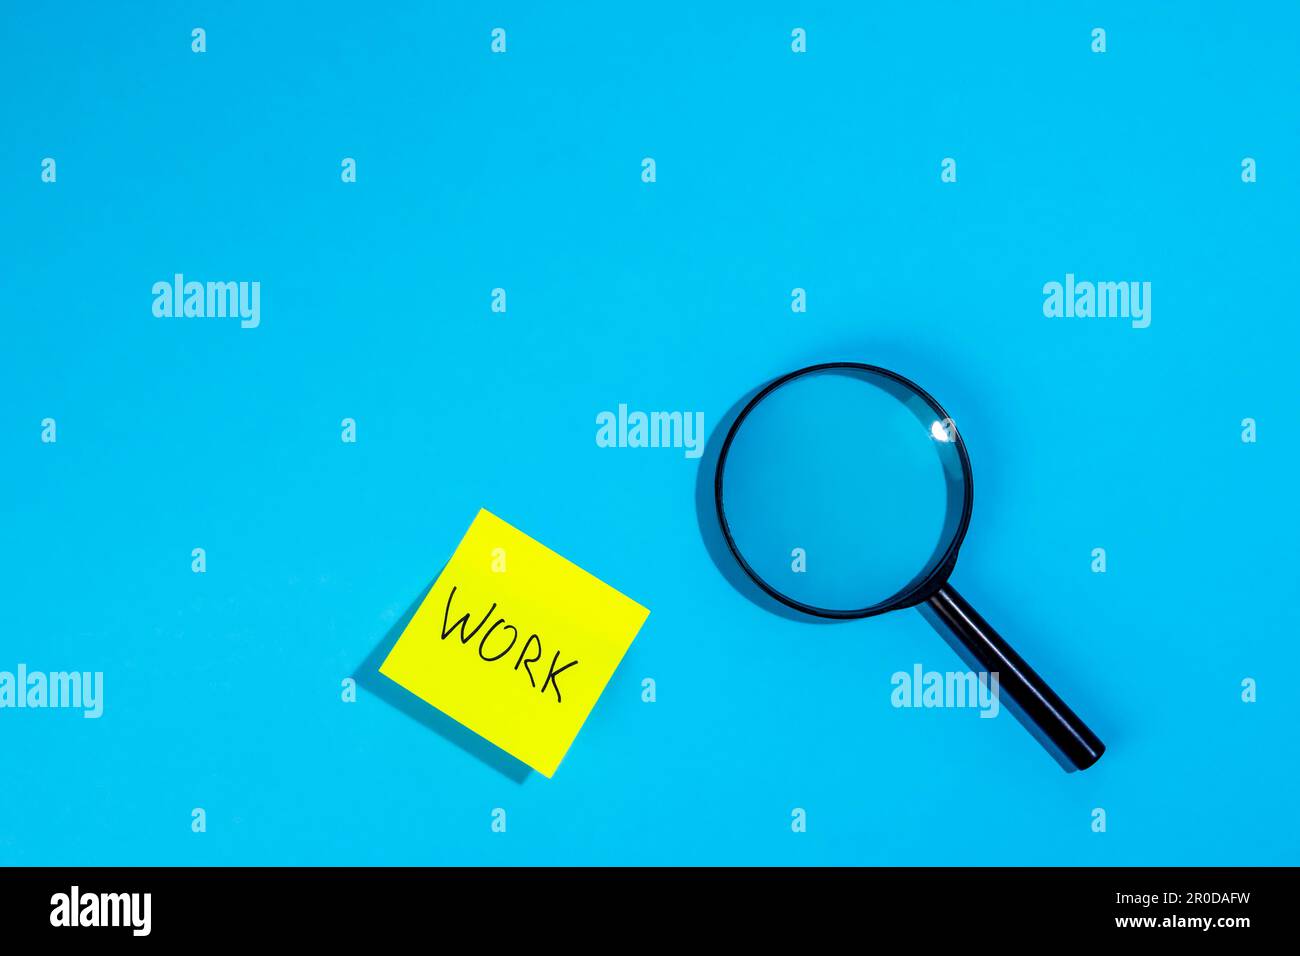 Magnifying loupe and a sticker with the word work on a blue background. Stock Photo